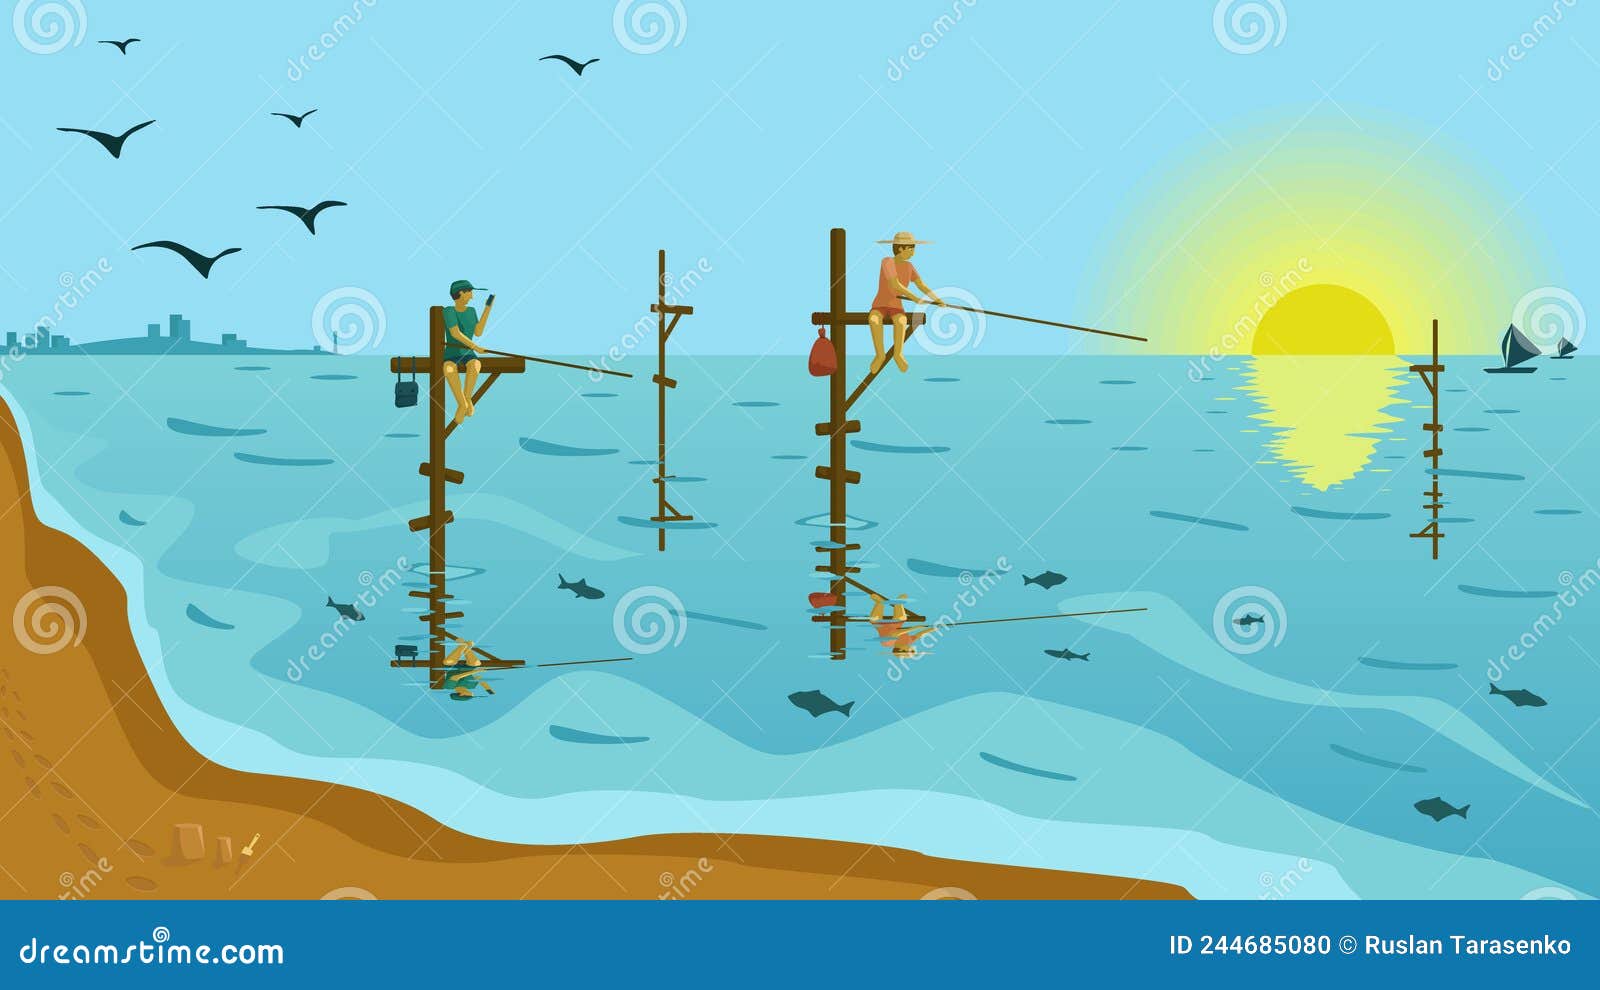 https://thumbs.dreamstime.com/z/fishermen-catch-fish-special-poles-sea-sunny-morning-fishing-background-silhouette-city-sailboats-distance-244685080.jpg